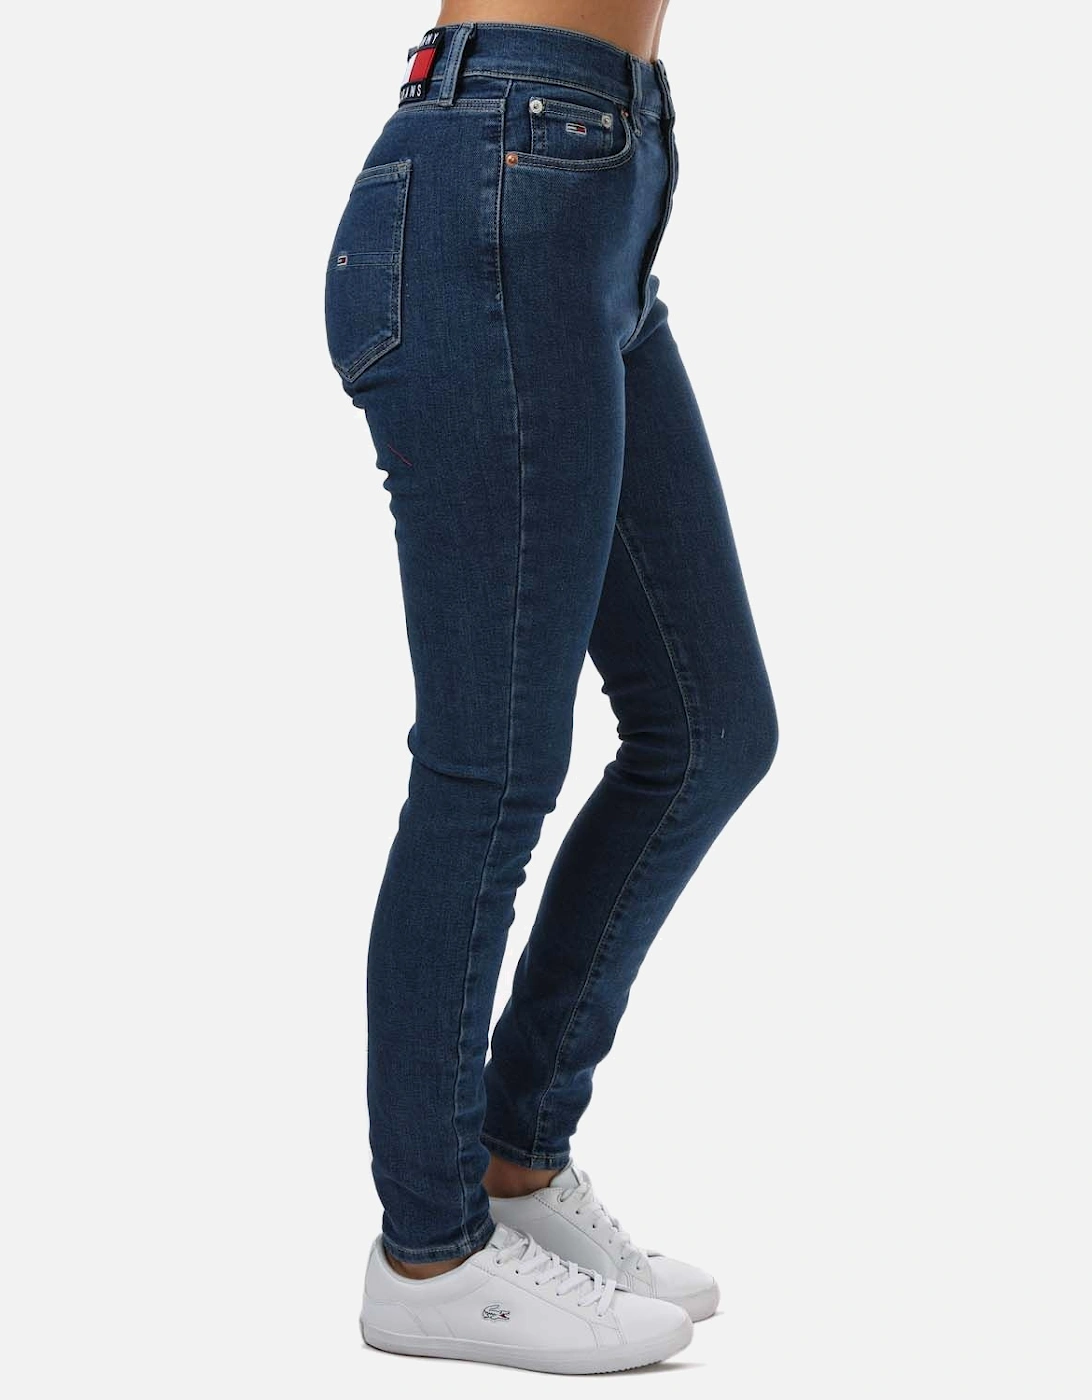 Womens Sylvia High Rise Super Skinny Jeans